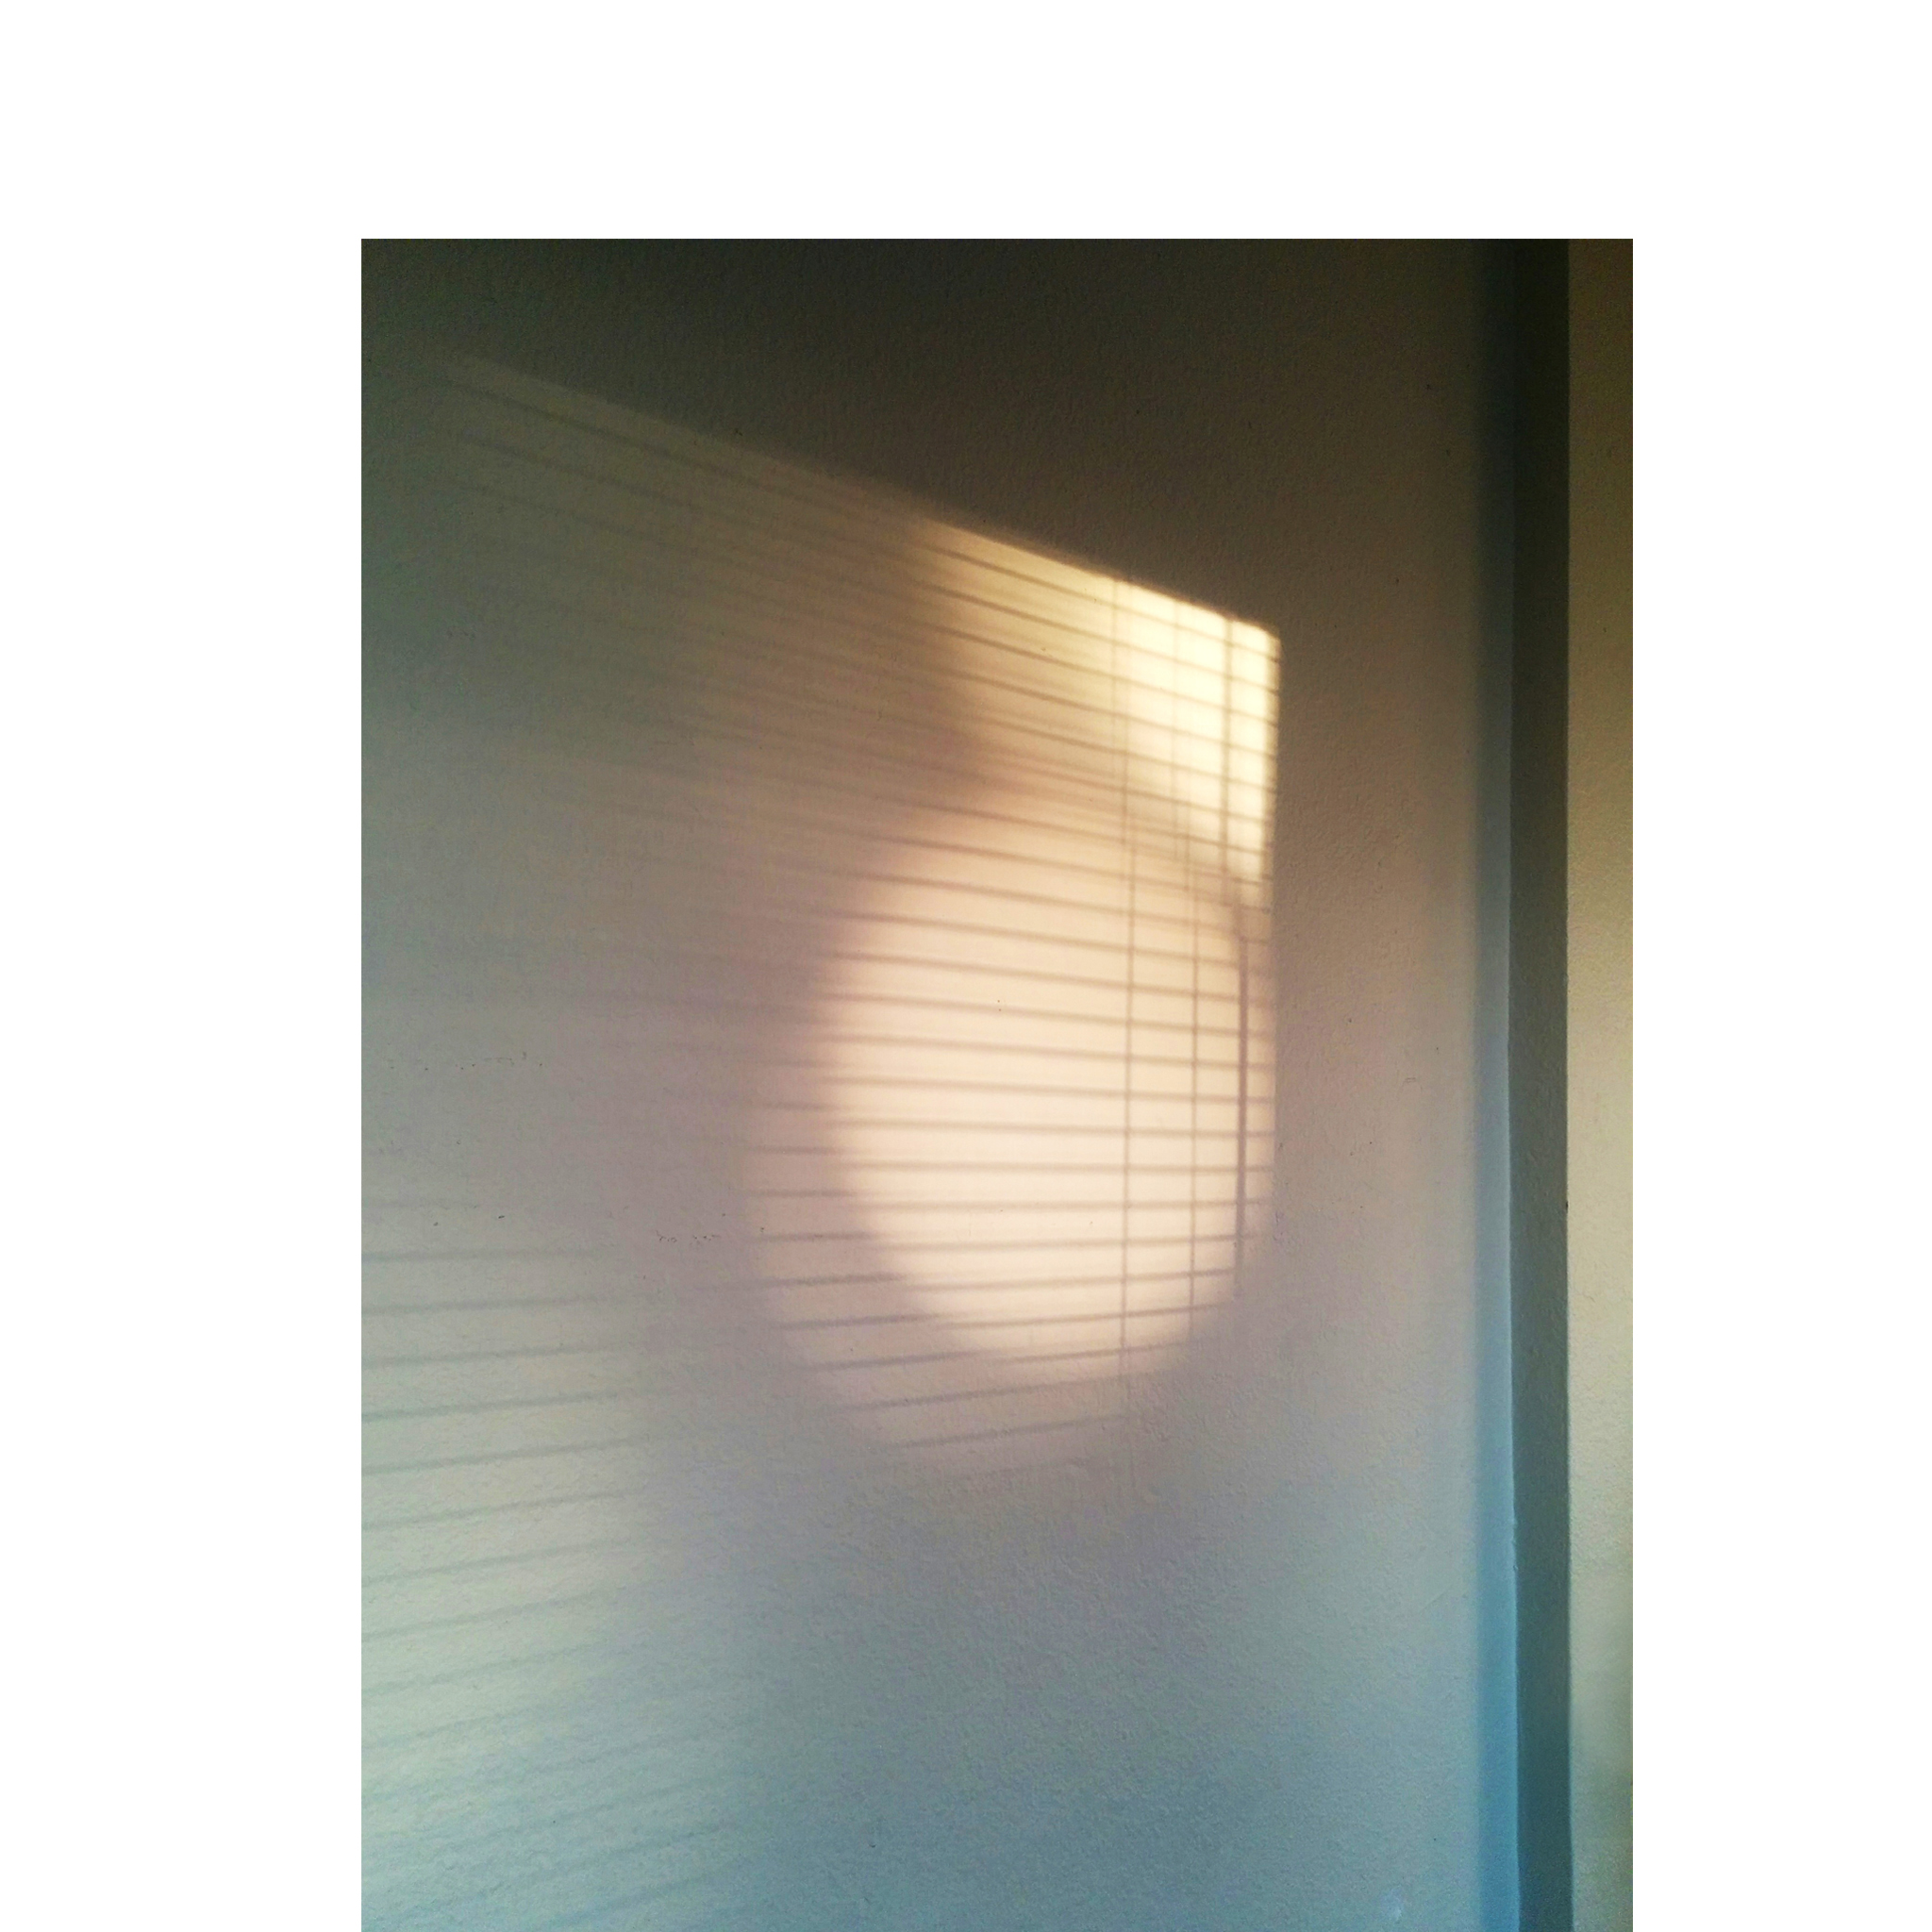 light spots and shadows cast from blinds